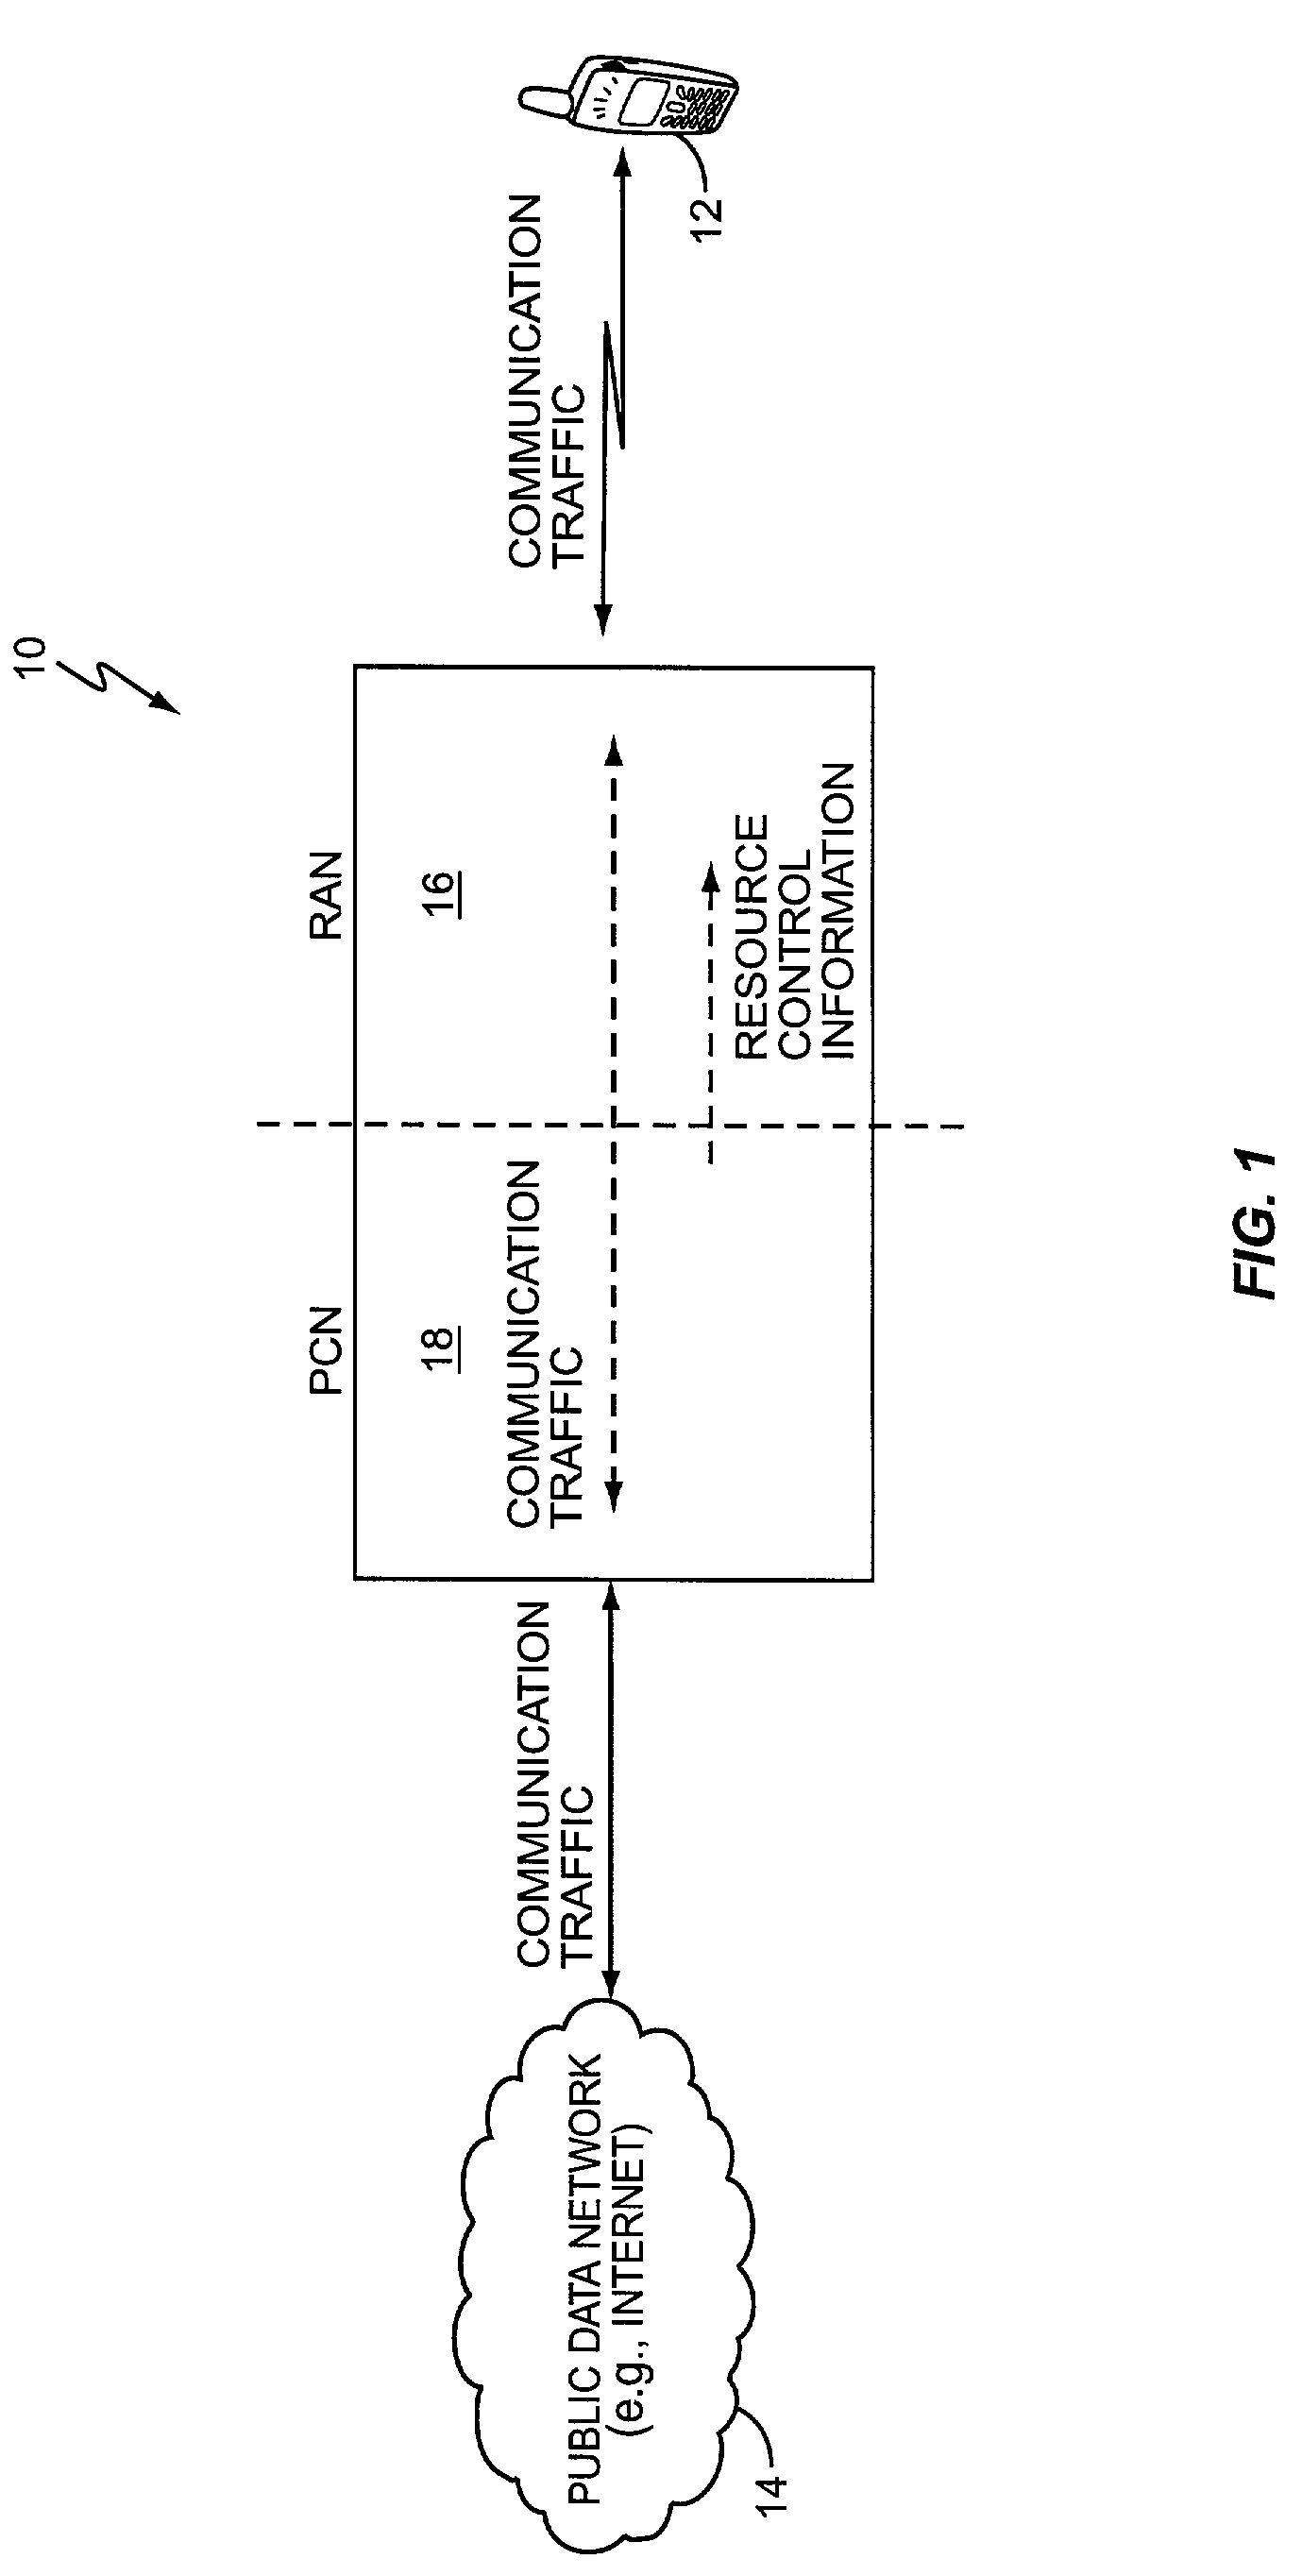 Applications based radio resource management in a wireless communication network